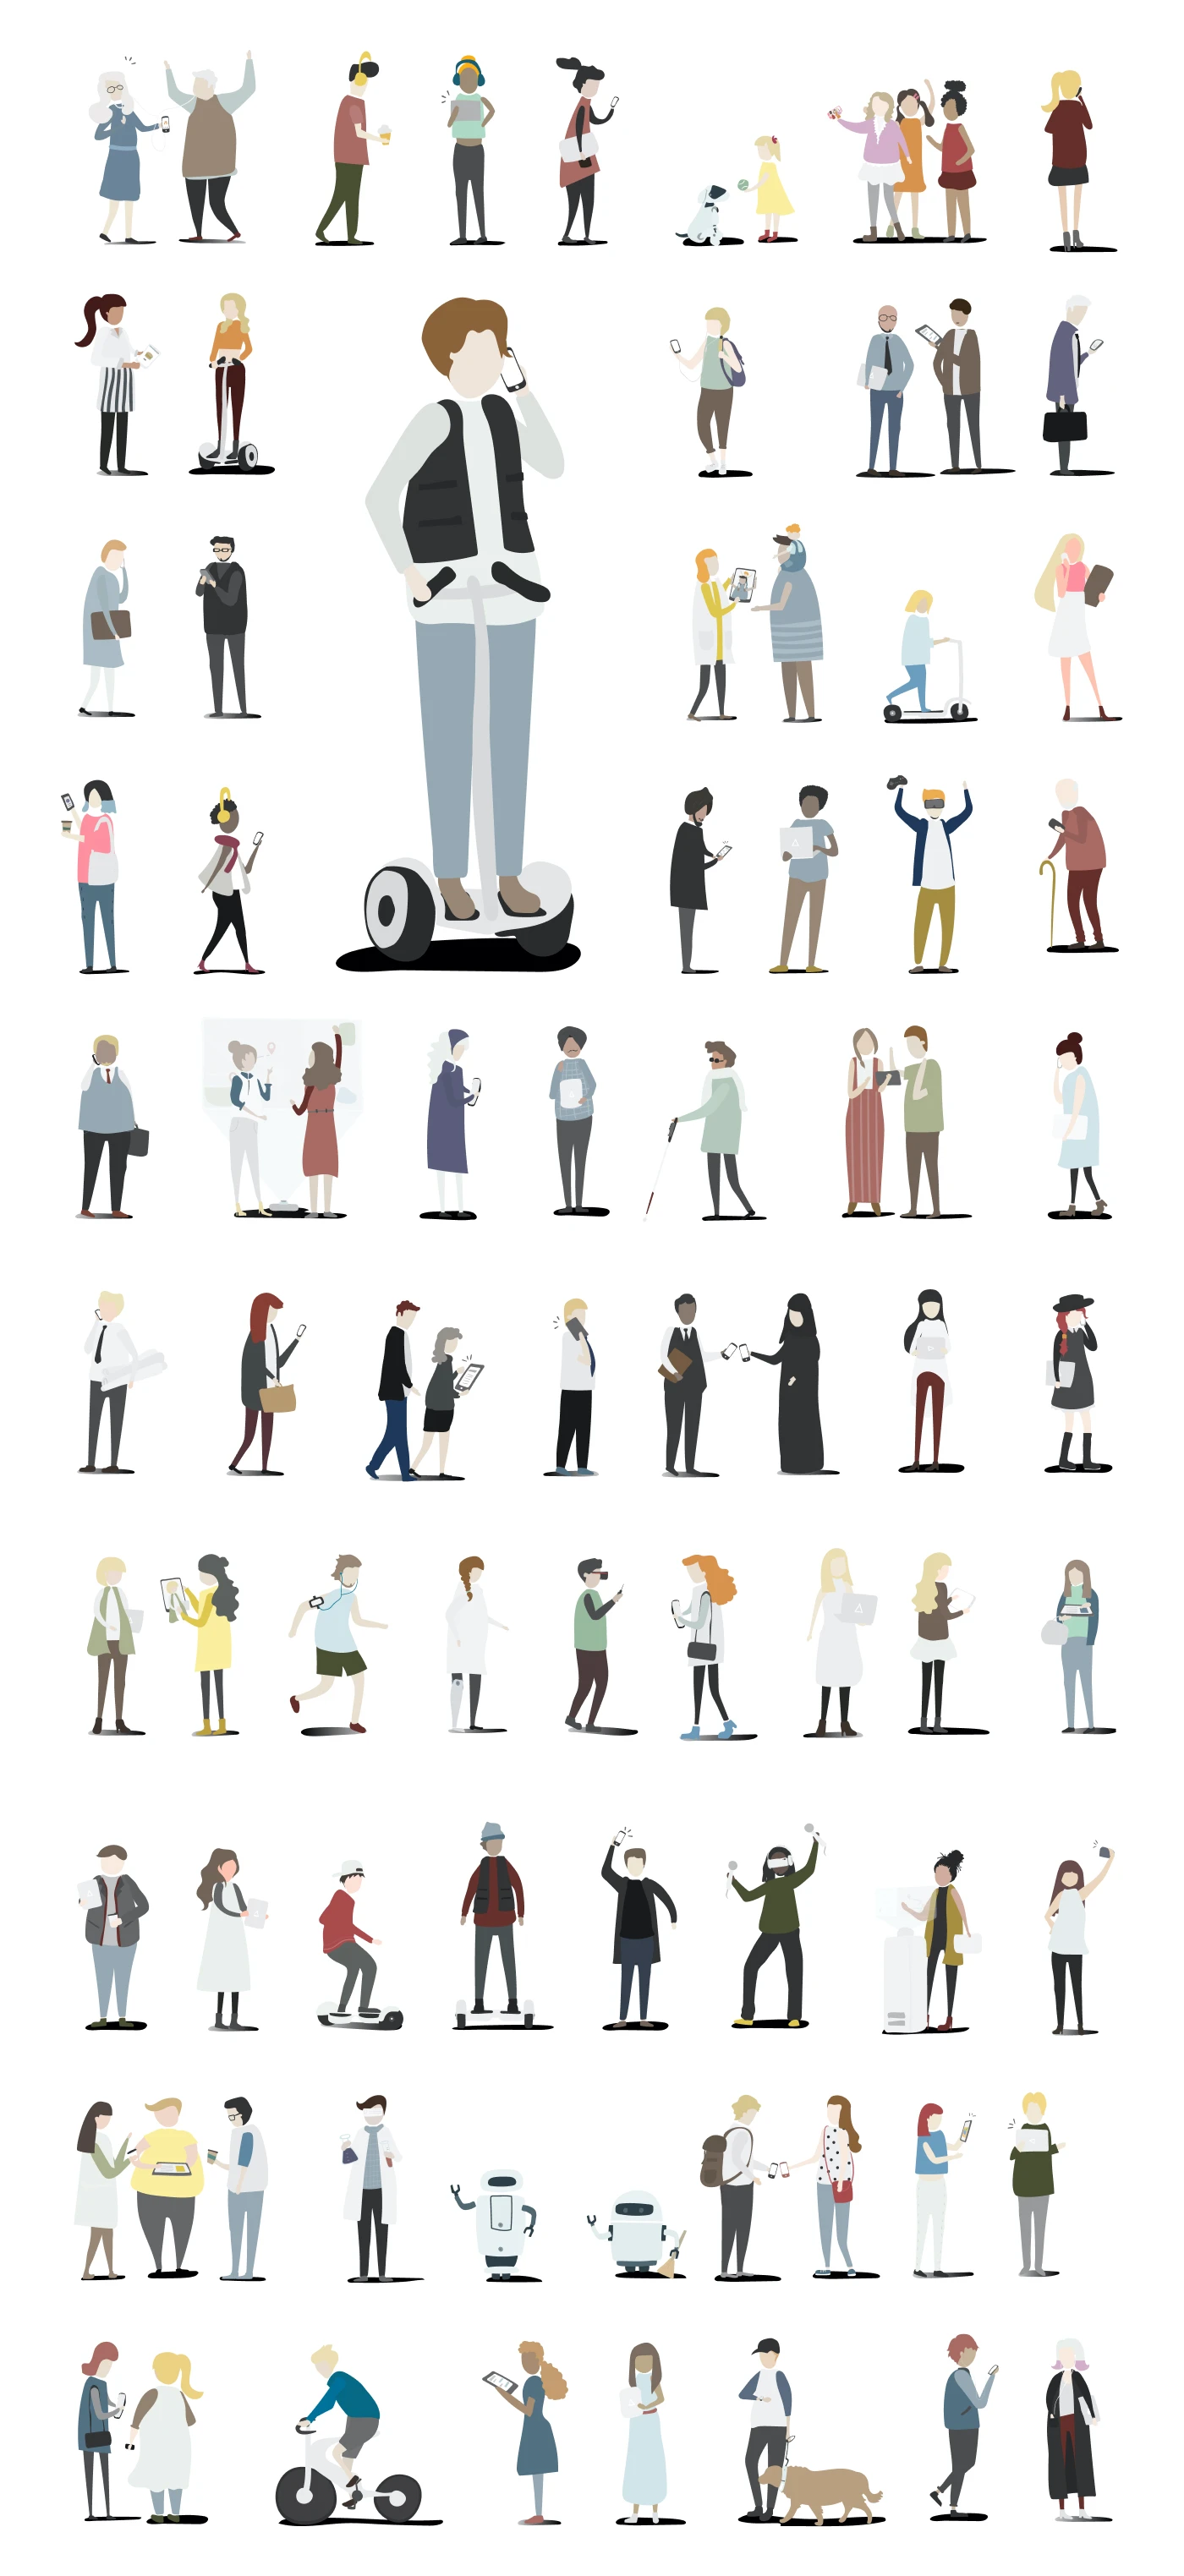 Vector Character Illustrations for Figma - A good collection of 78 illustrations showing people in action - dancing, communicating, driving, taking selfies, etc. It's always good to have illustrations at hand and with this nice customizable resource, you can include these characters in various projects.